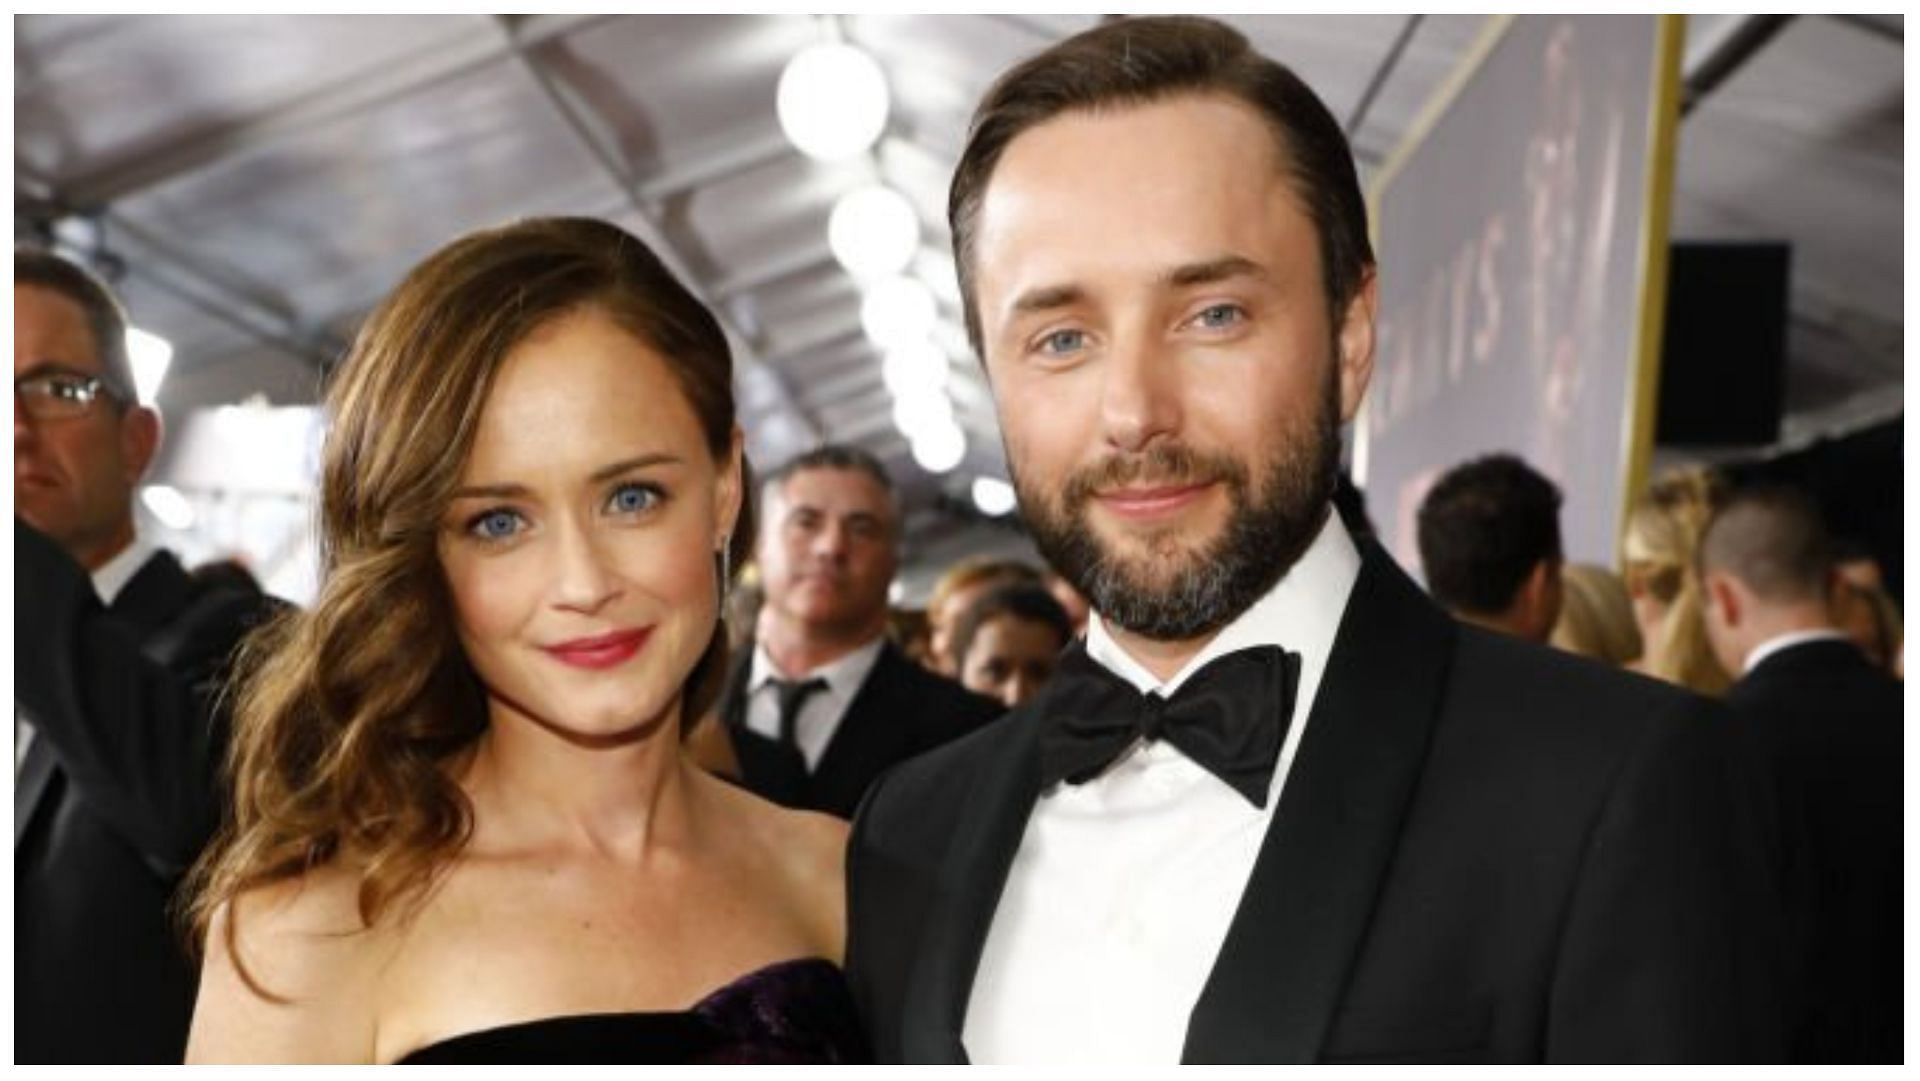 Vincent Kartheiser and Alexis Bledel got married in 2014 (Image via Trae Patton/Getty Images)